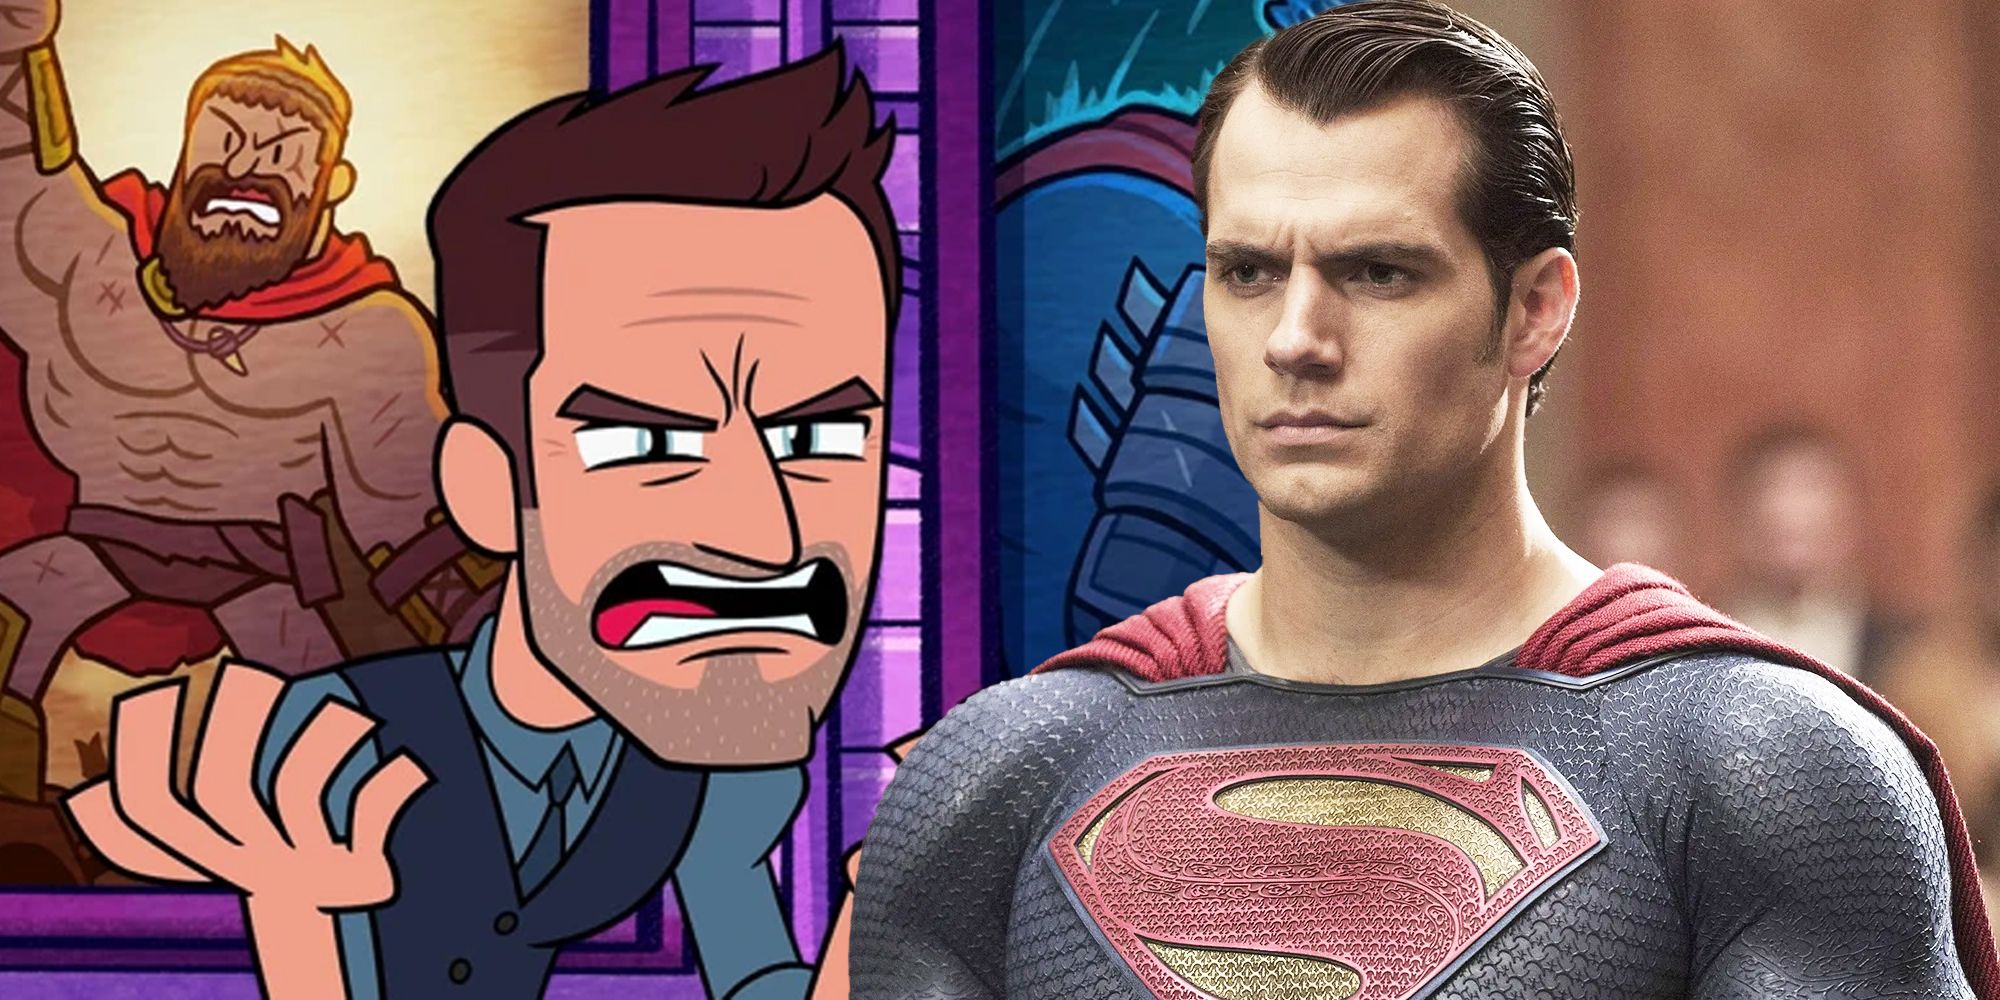 Superman and Zack Snyder in Teen Titans Go!